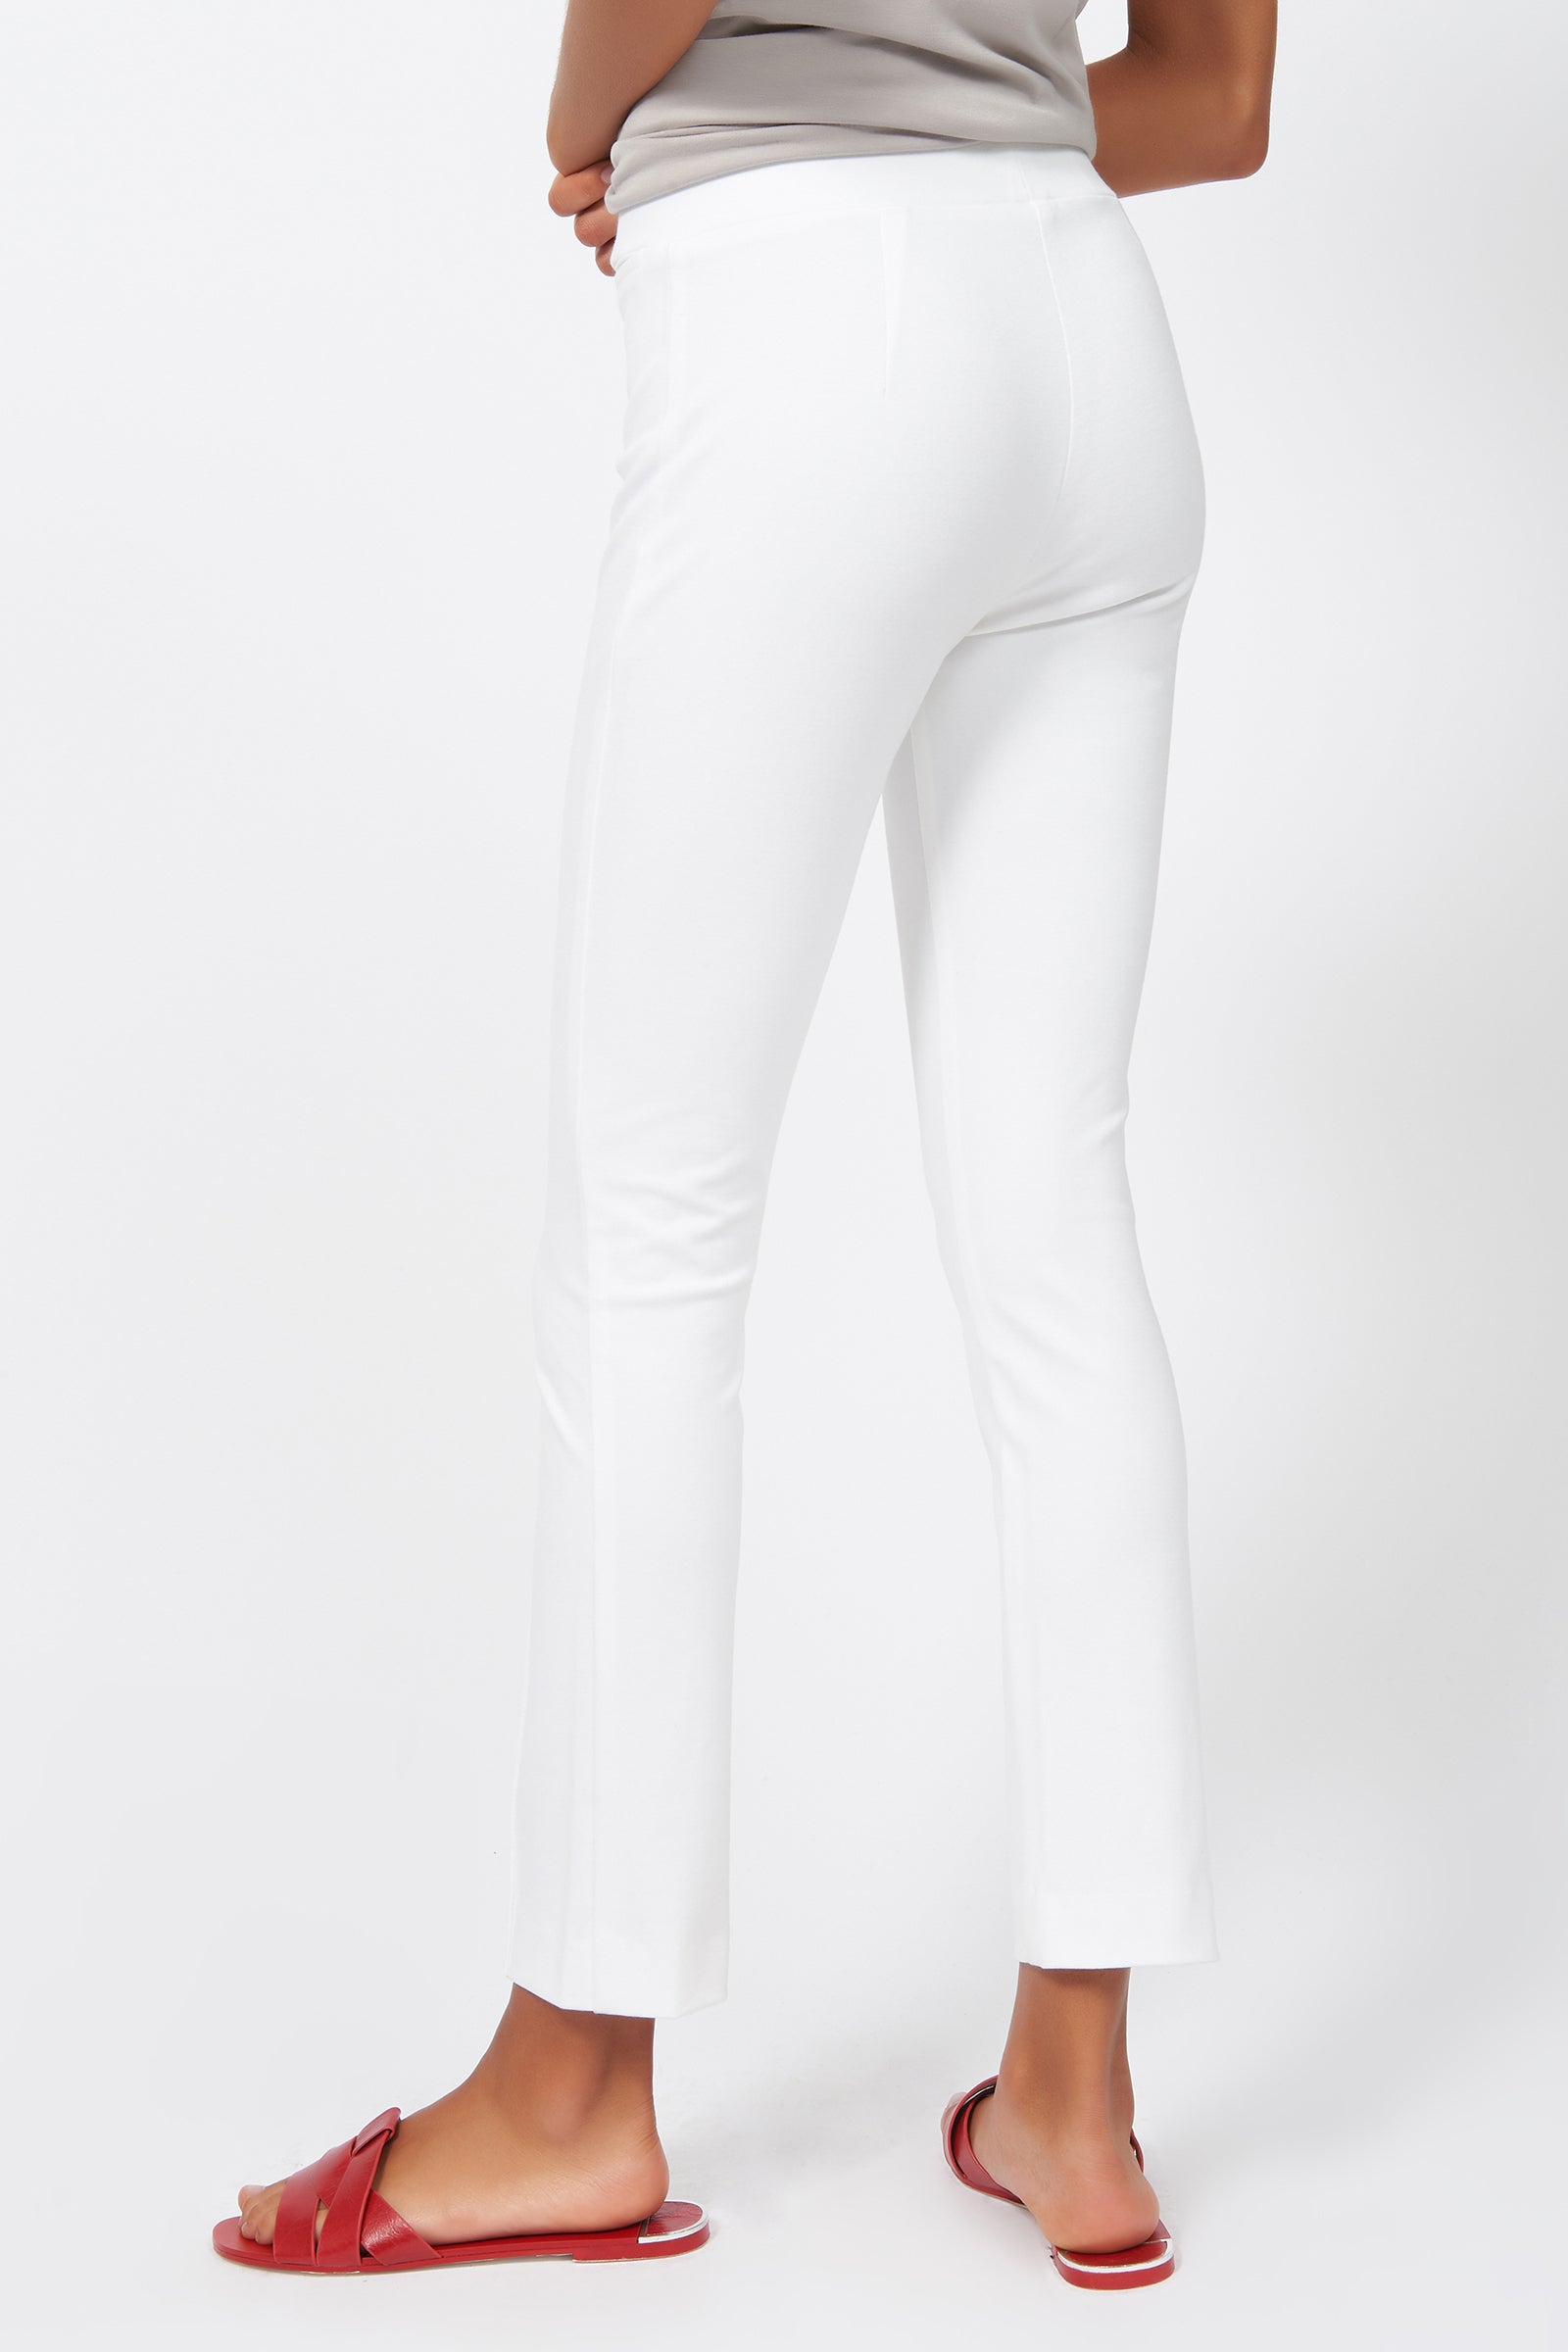 Kal Rieman Pintuck Ponte Ankle Pant in White on Model Back View